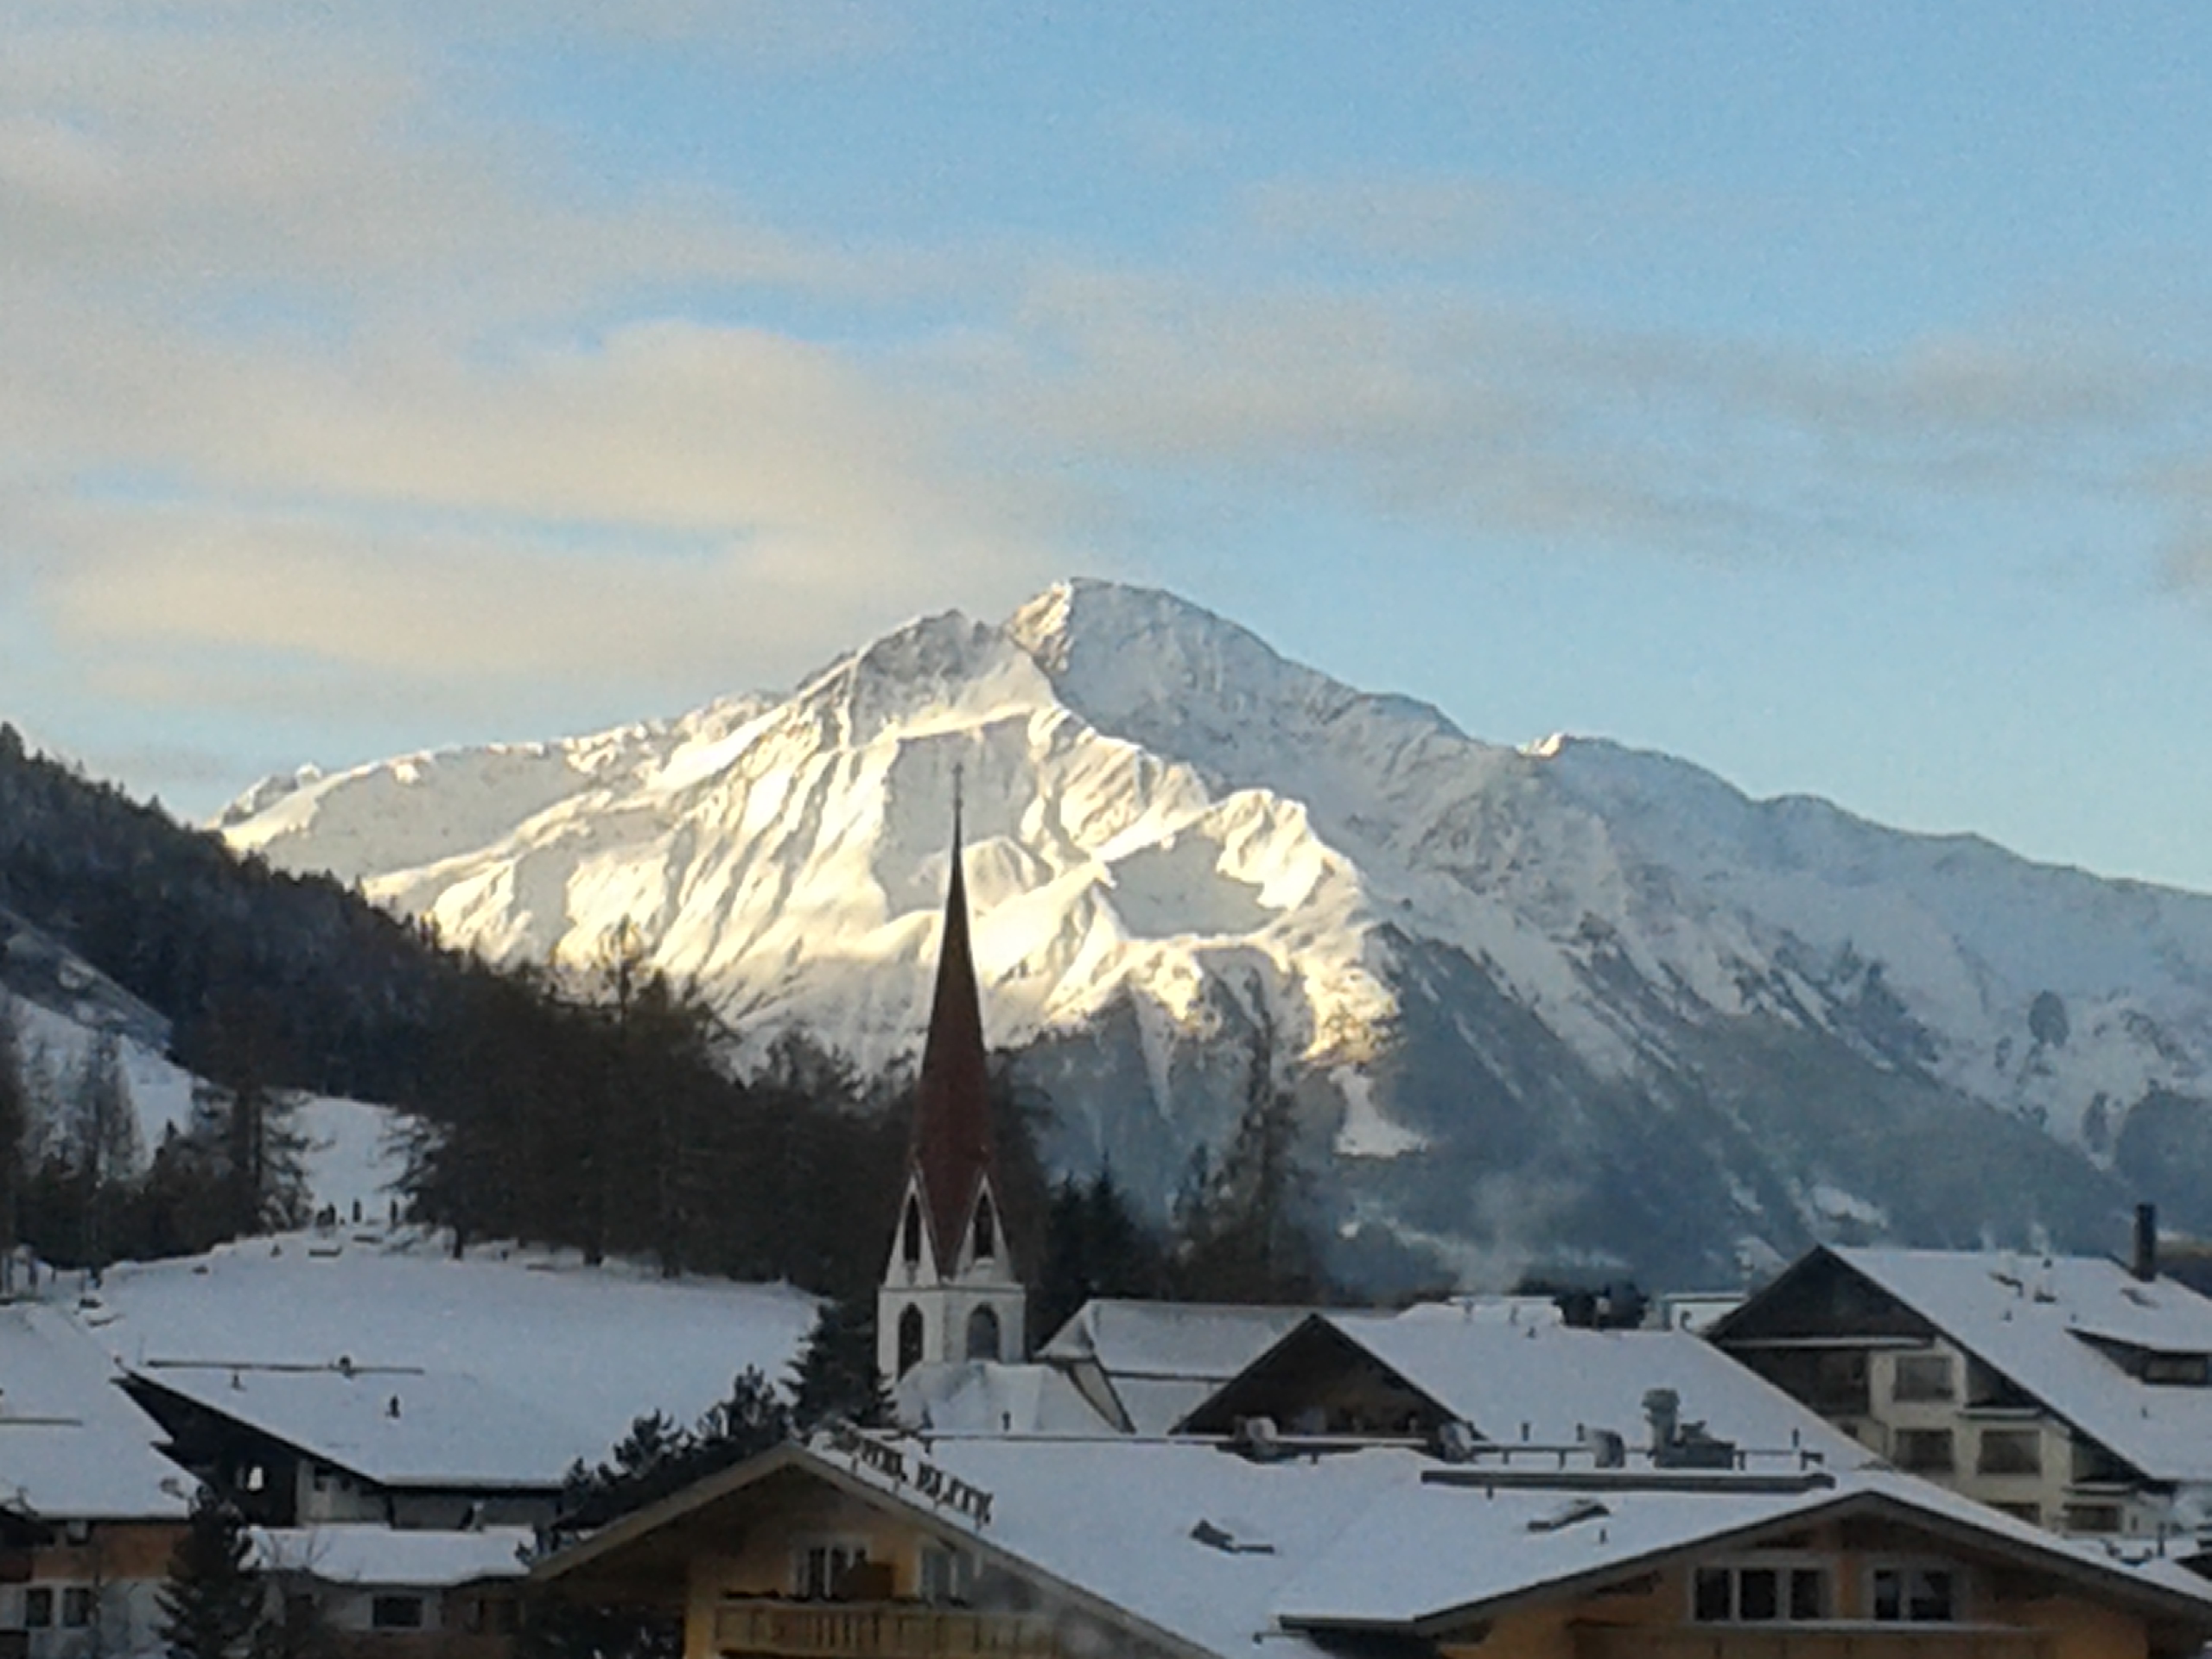 Seefeld town view